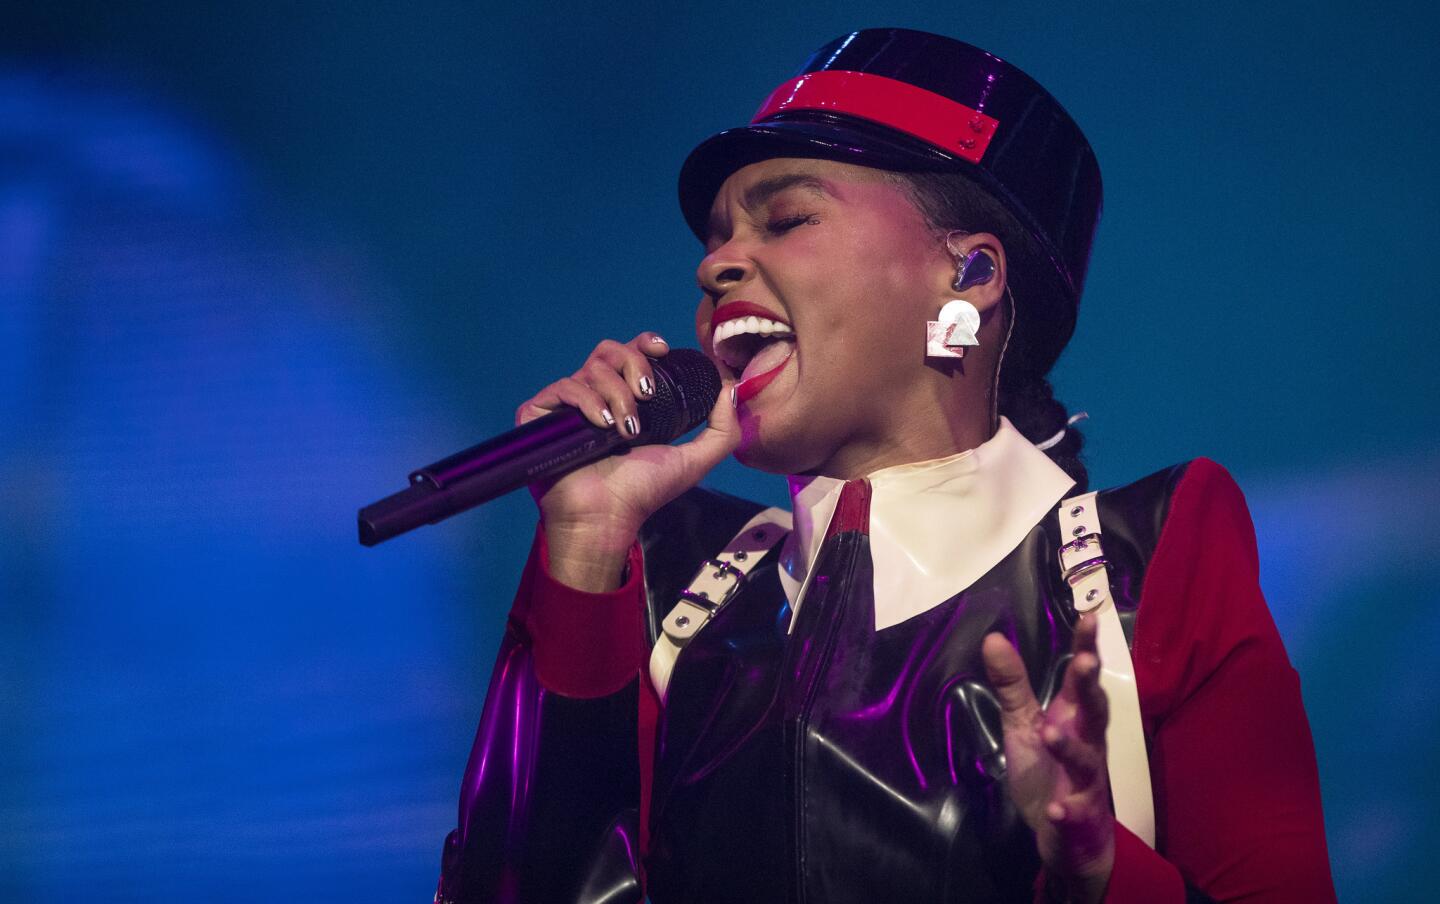 Janelle Monae performs on the Coachella stage.